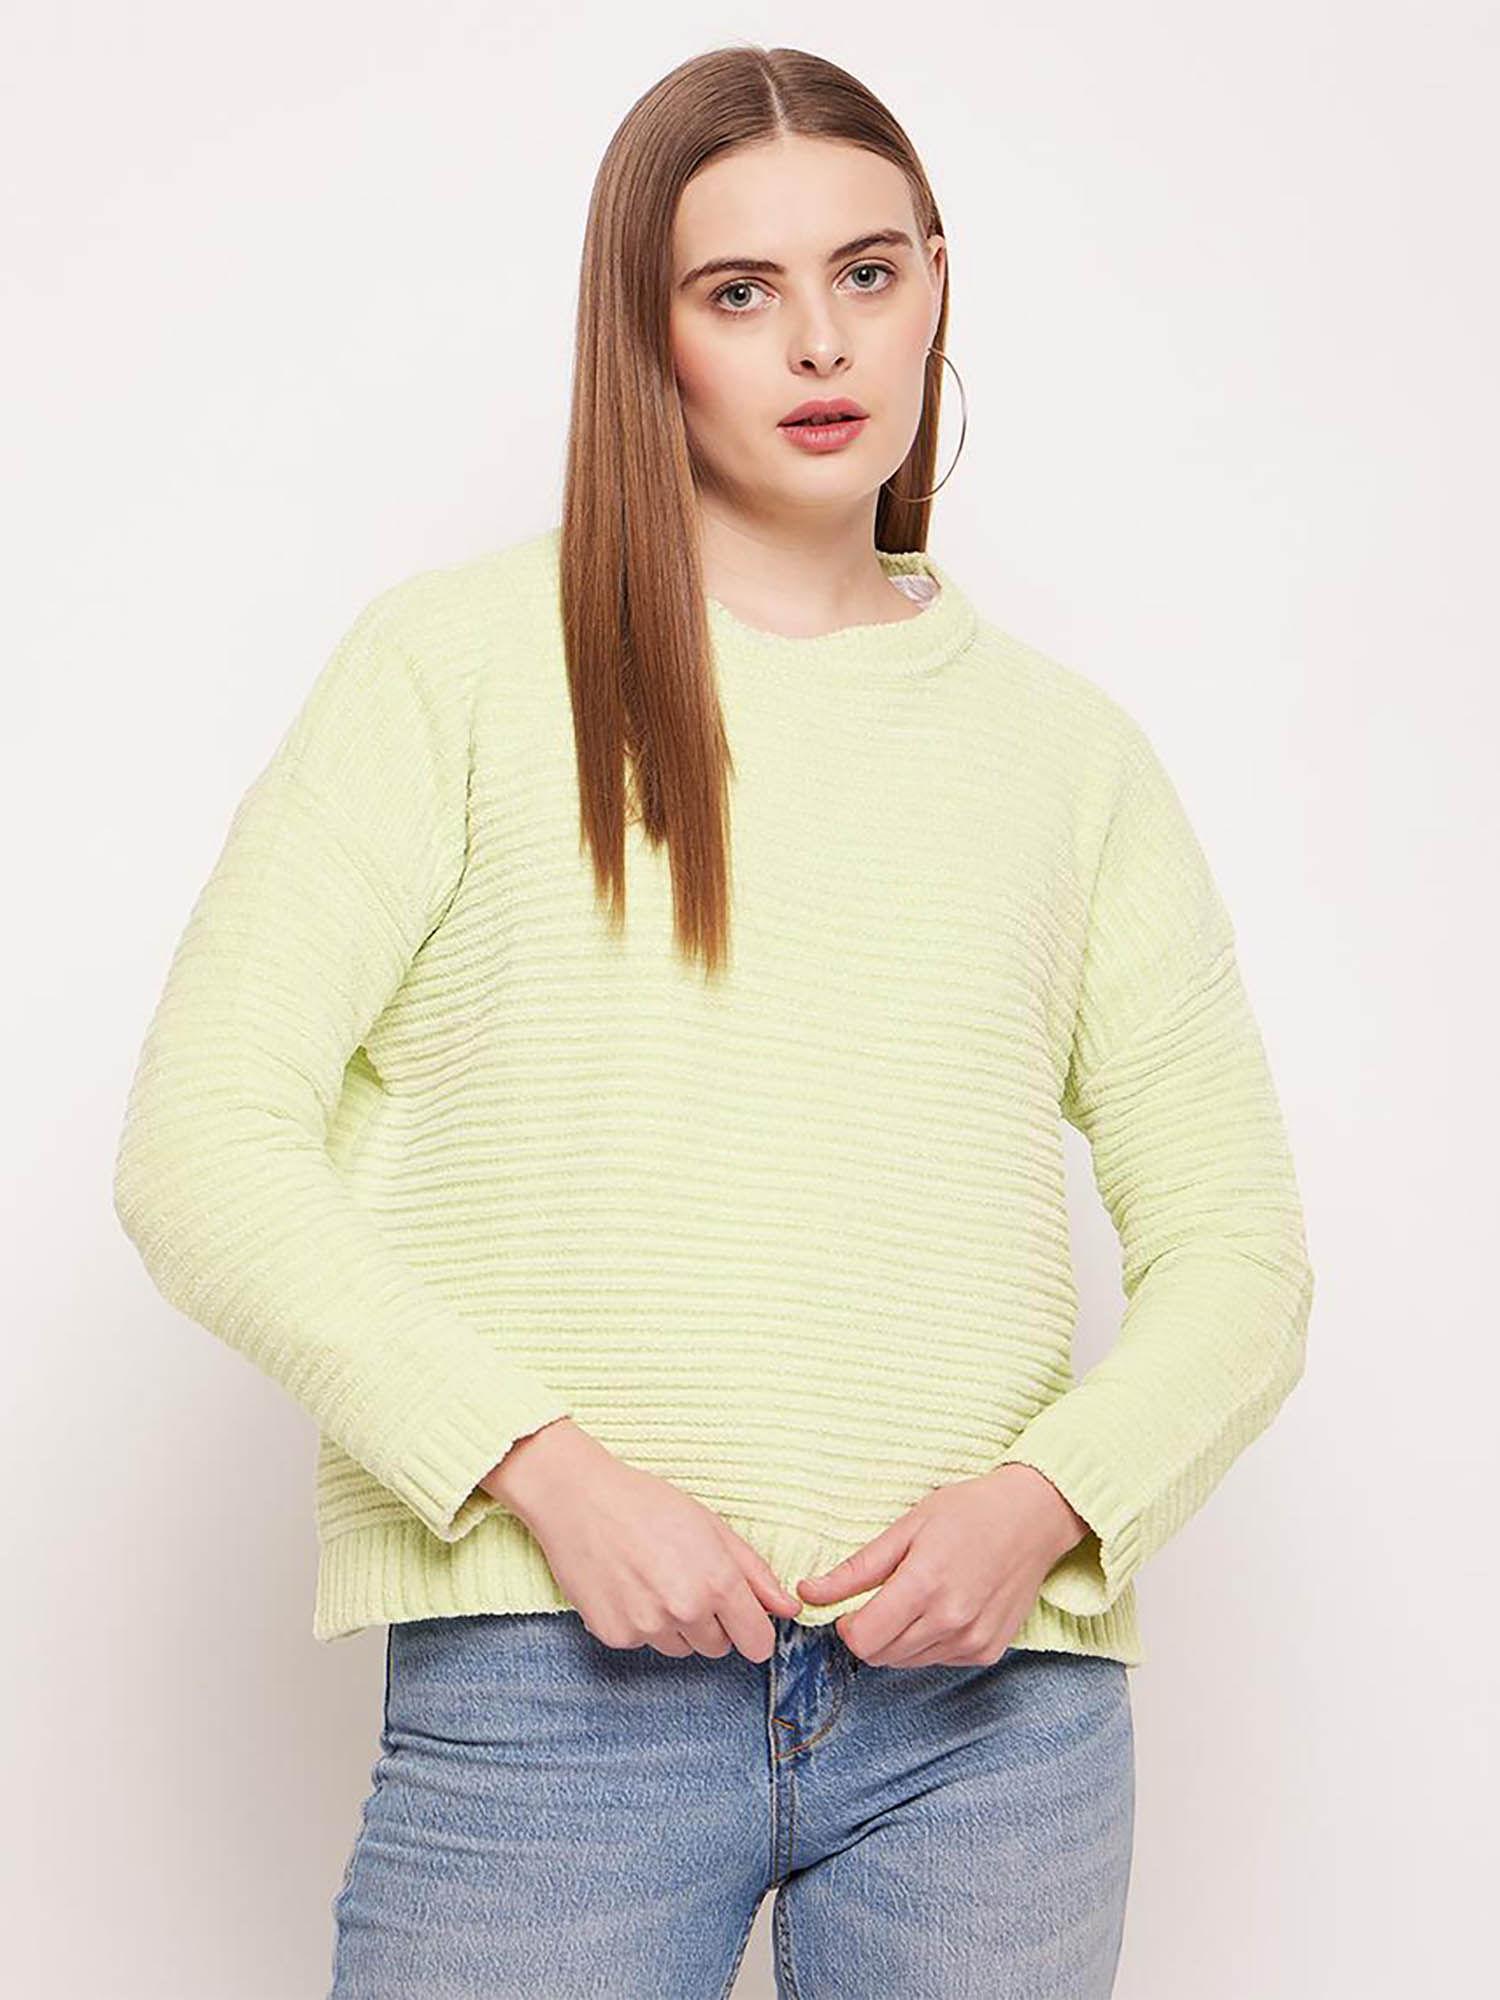 barcelona woven full sleeves round neck green sweater